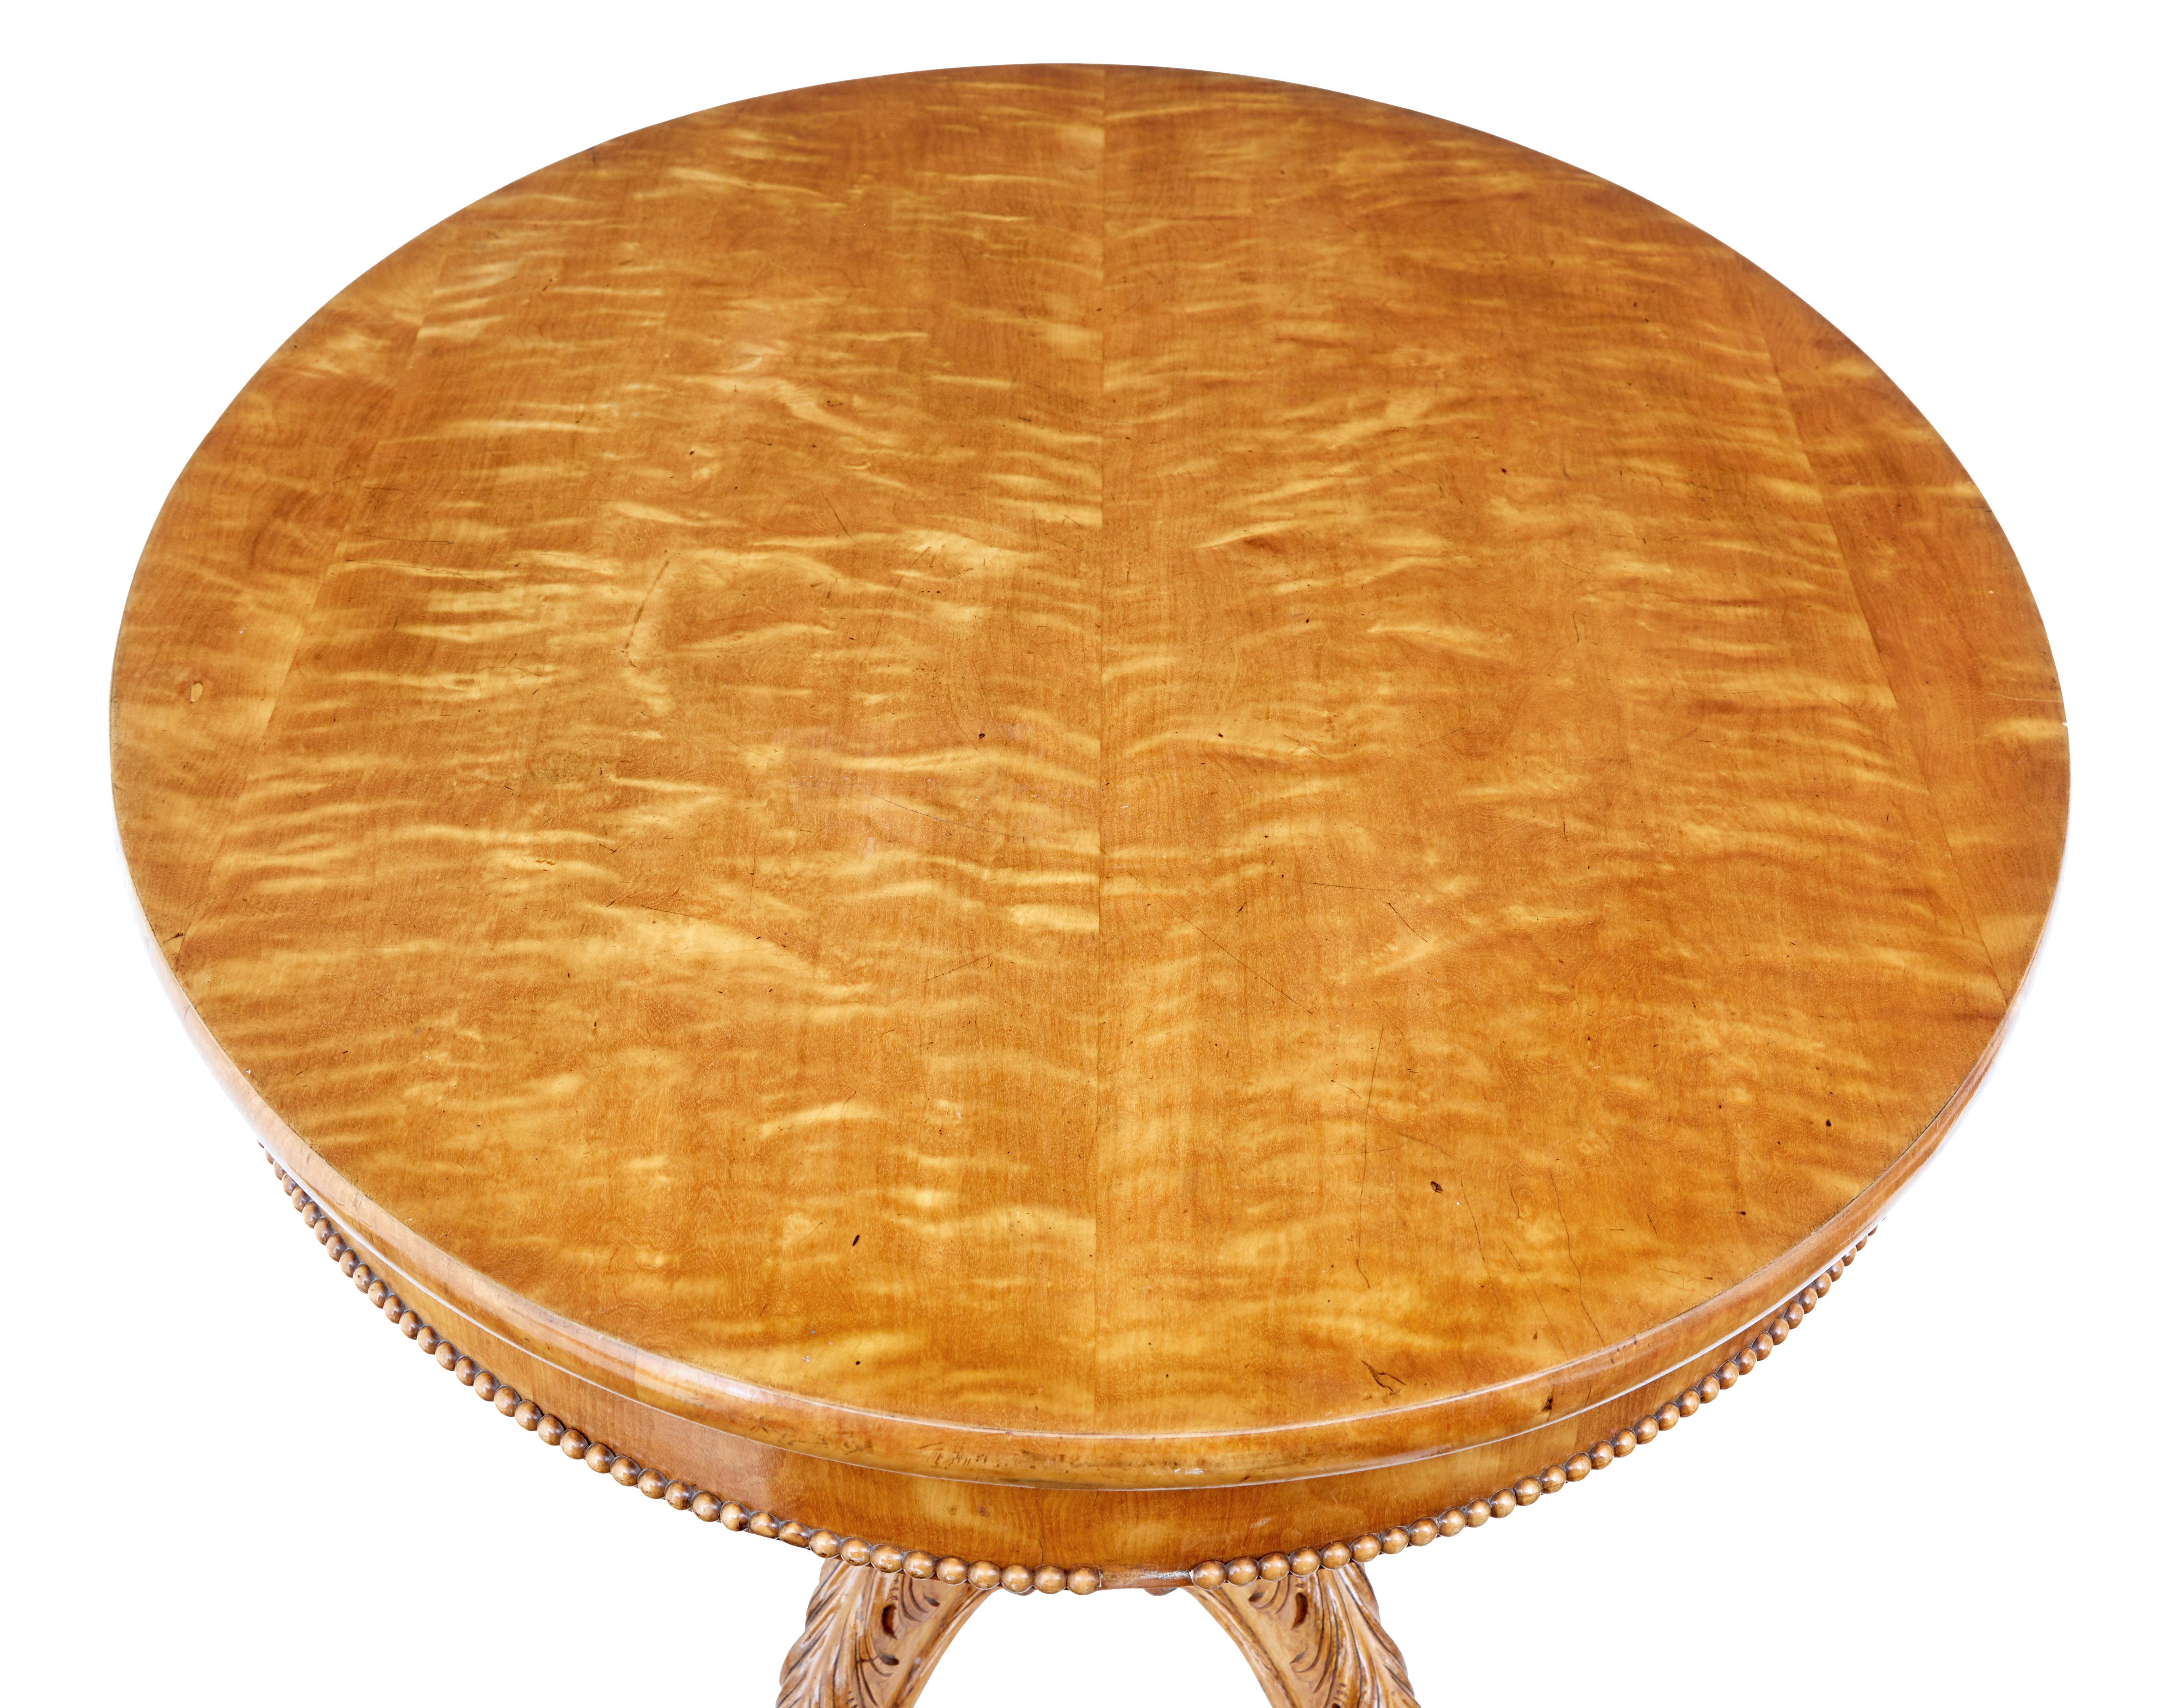 High Victorian 19th Century Swedish Carved Birch Oval Centre Table